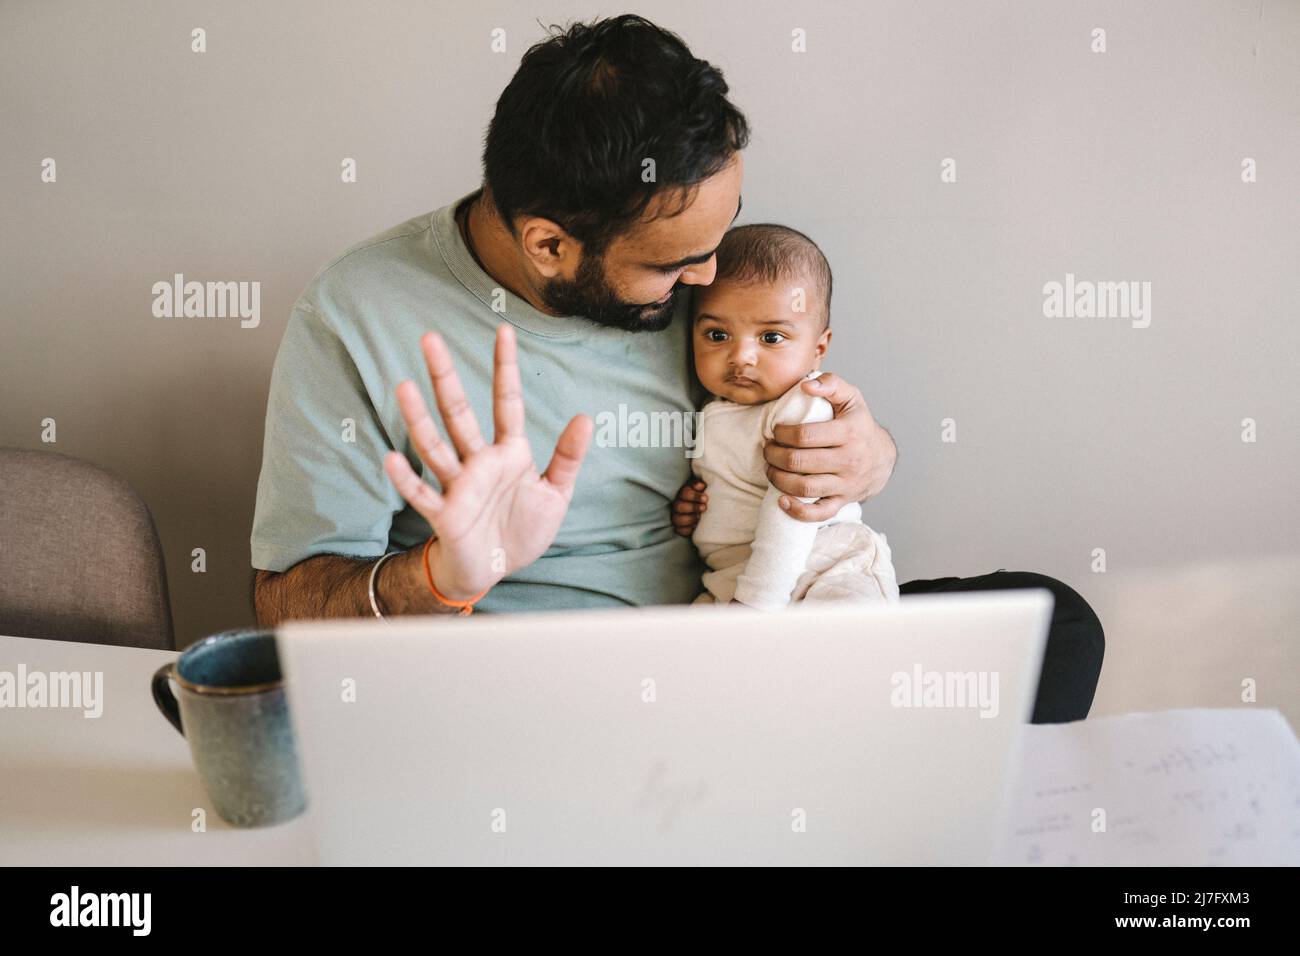 Father with baby working from home Stock Photo